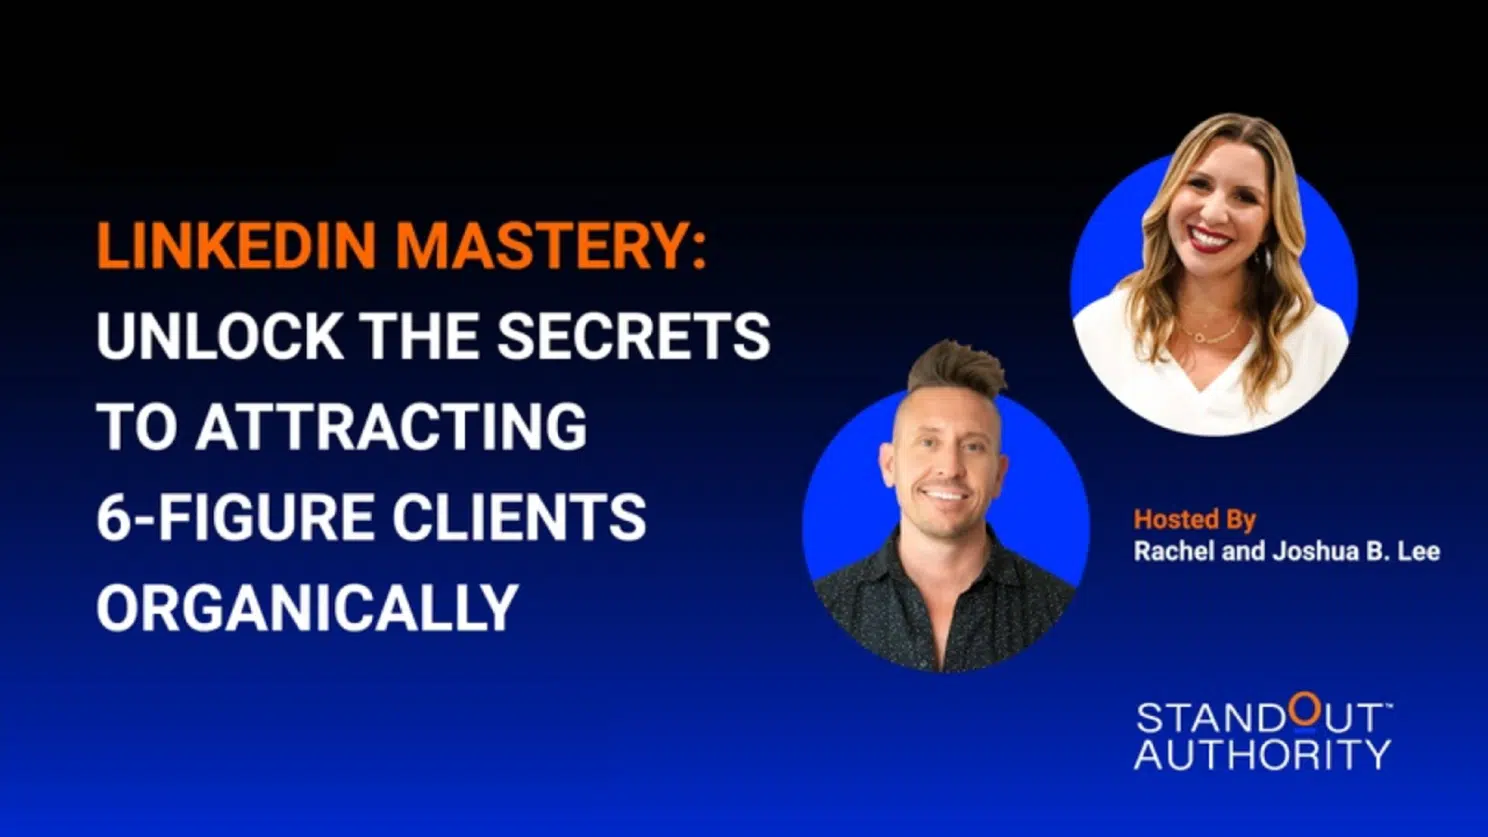 LinkedIn Mastery: Unlock the Secrets to Attracting 6-Figure Clients Organically